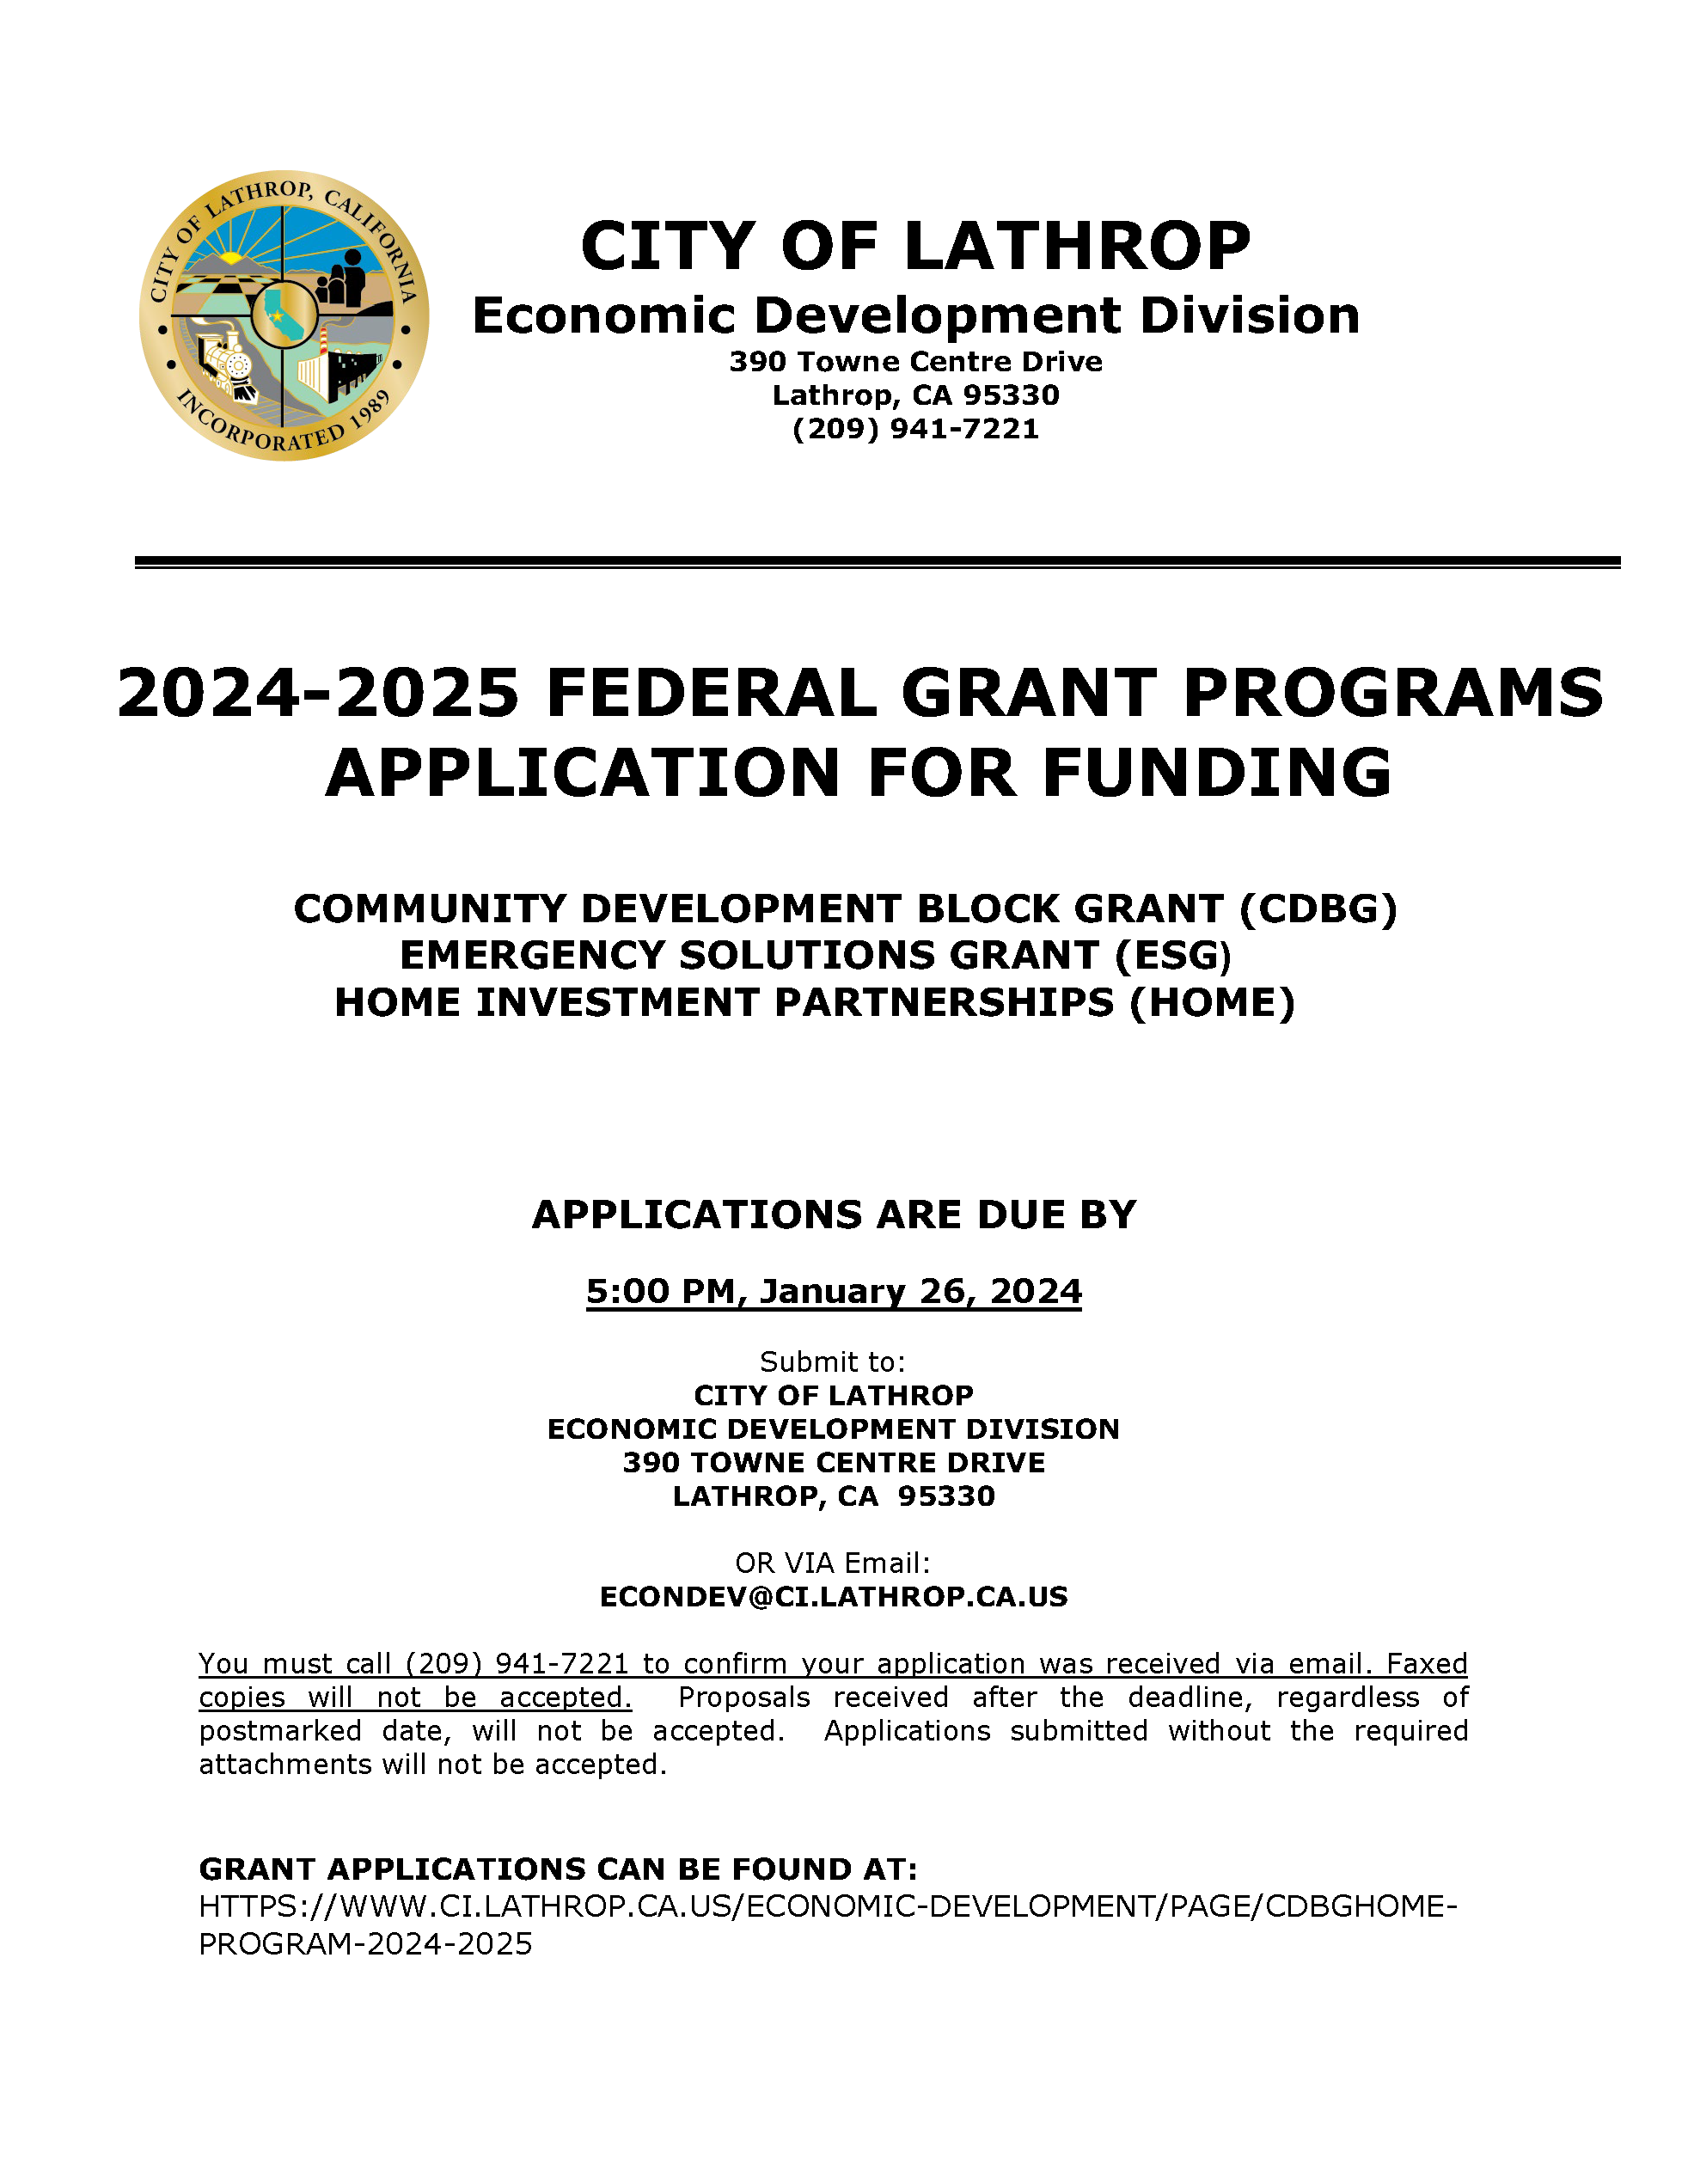 Lathrop Cdbg Home 2024 2025 Federal Grant Programs Application For Funding Page 01 